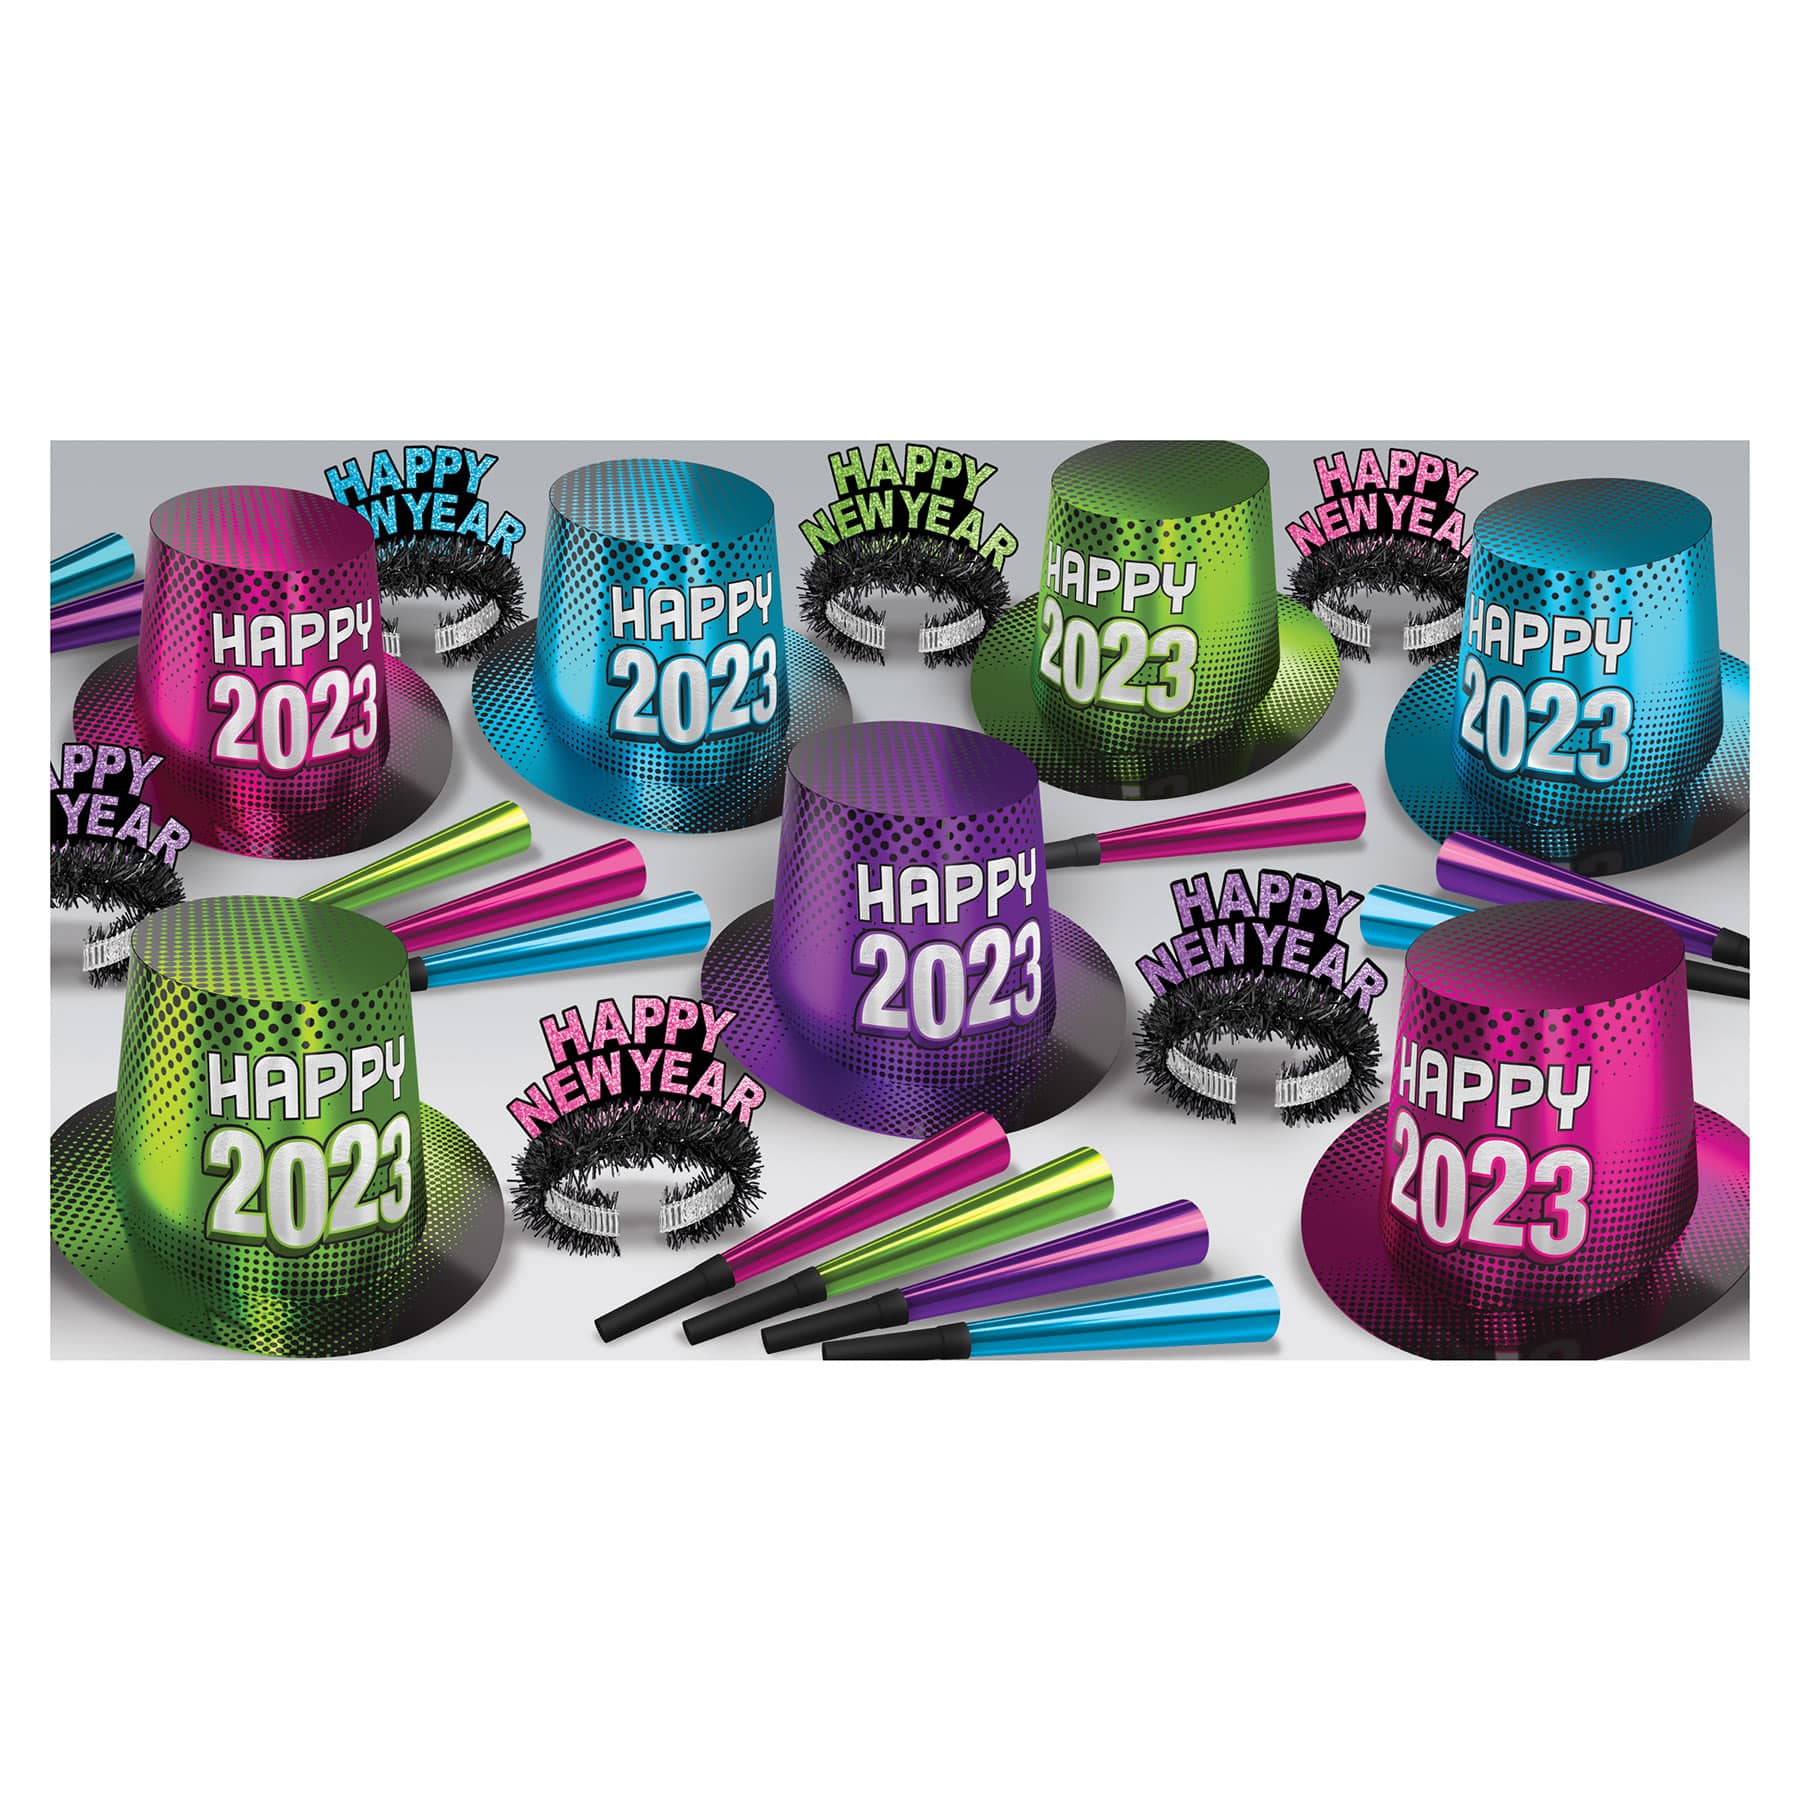 New Year "2023" Assortment for 50